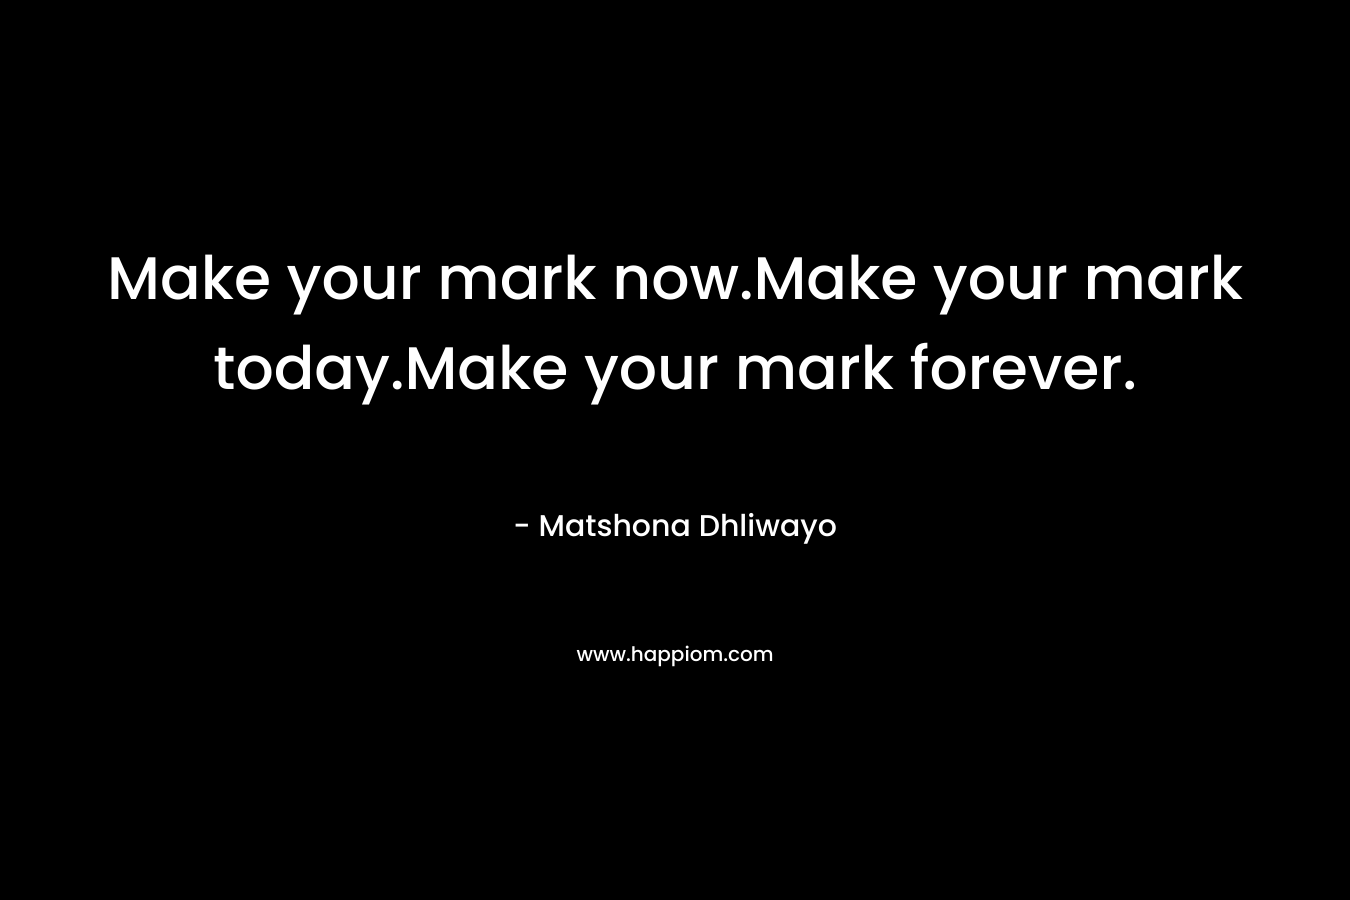 Make your mark now.Make your mark today.Make your mark forever.